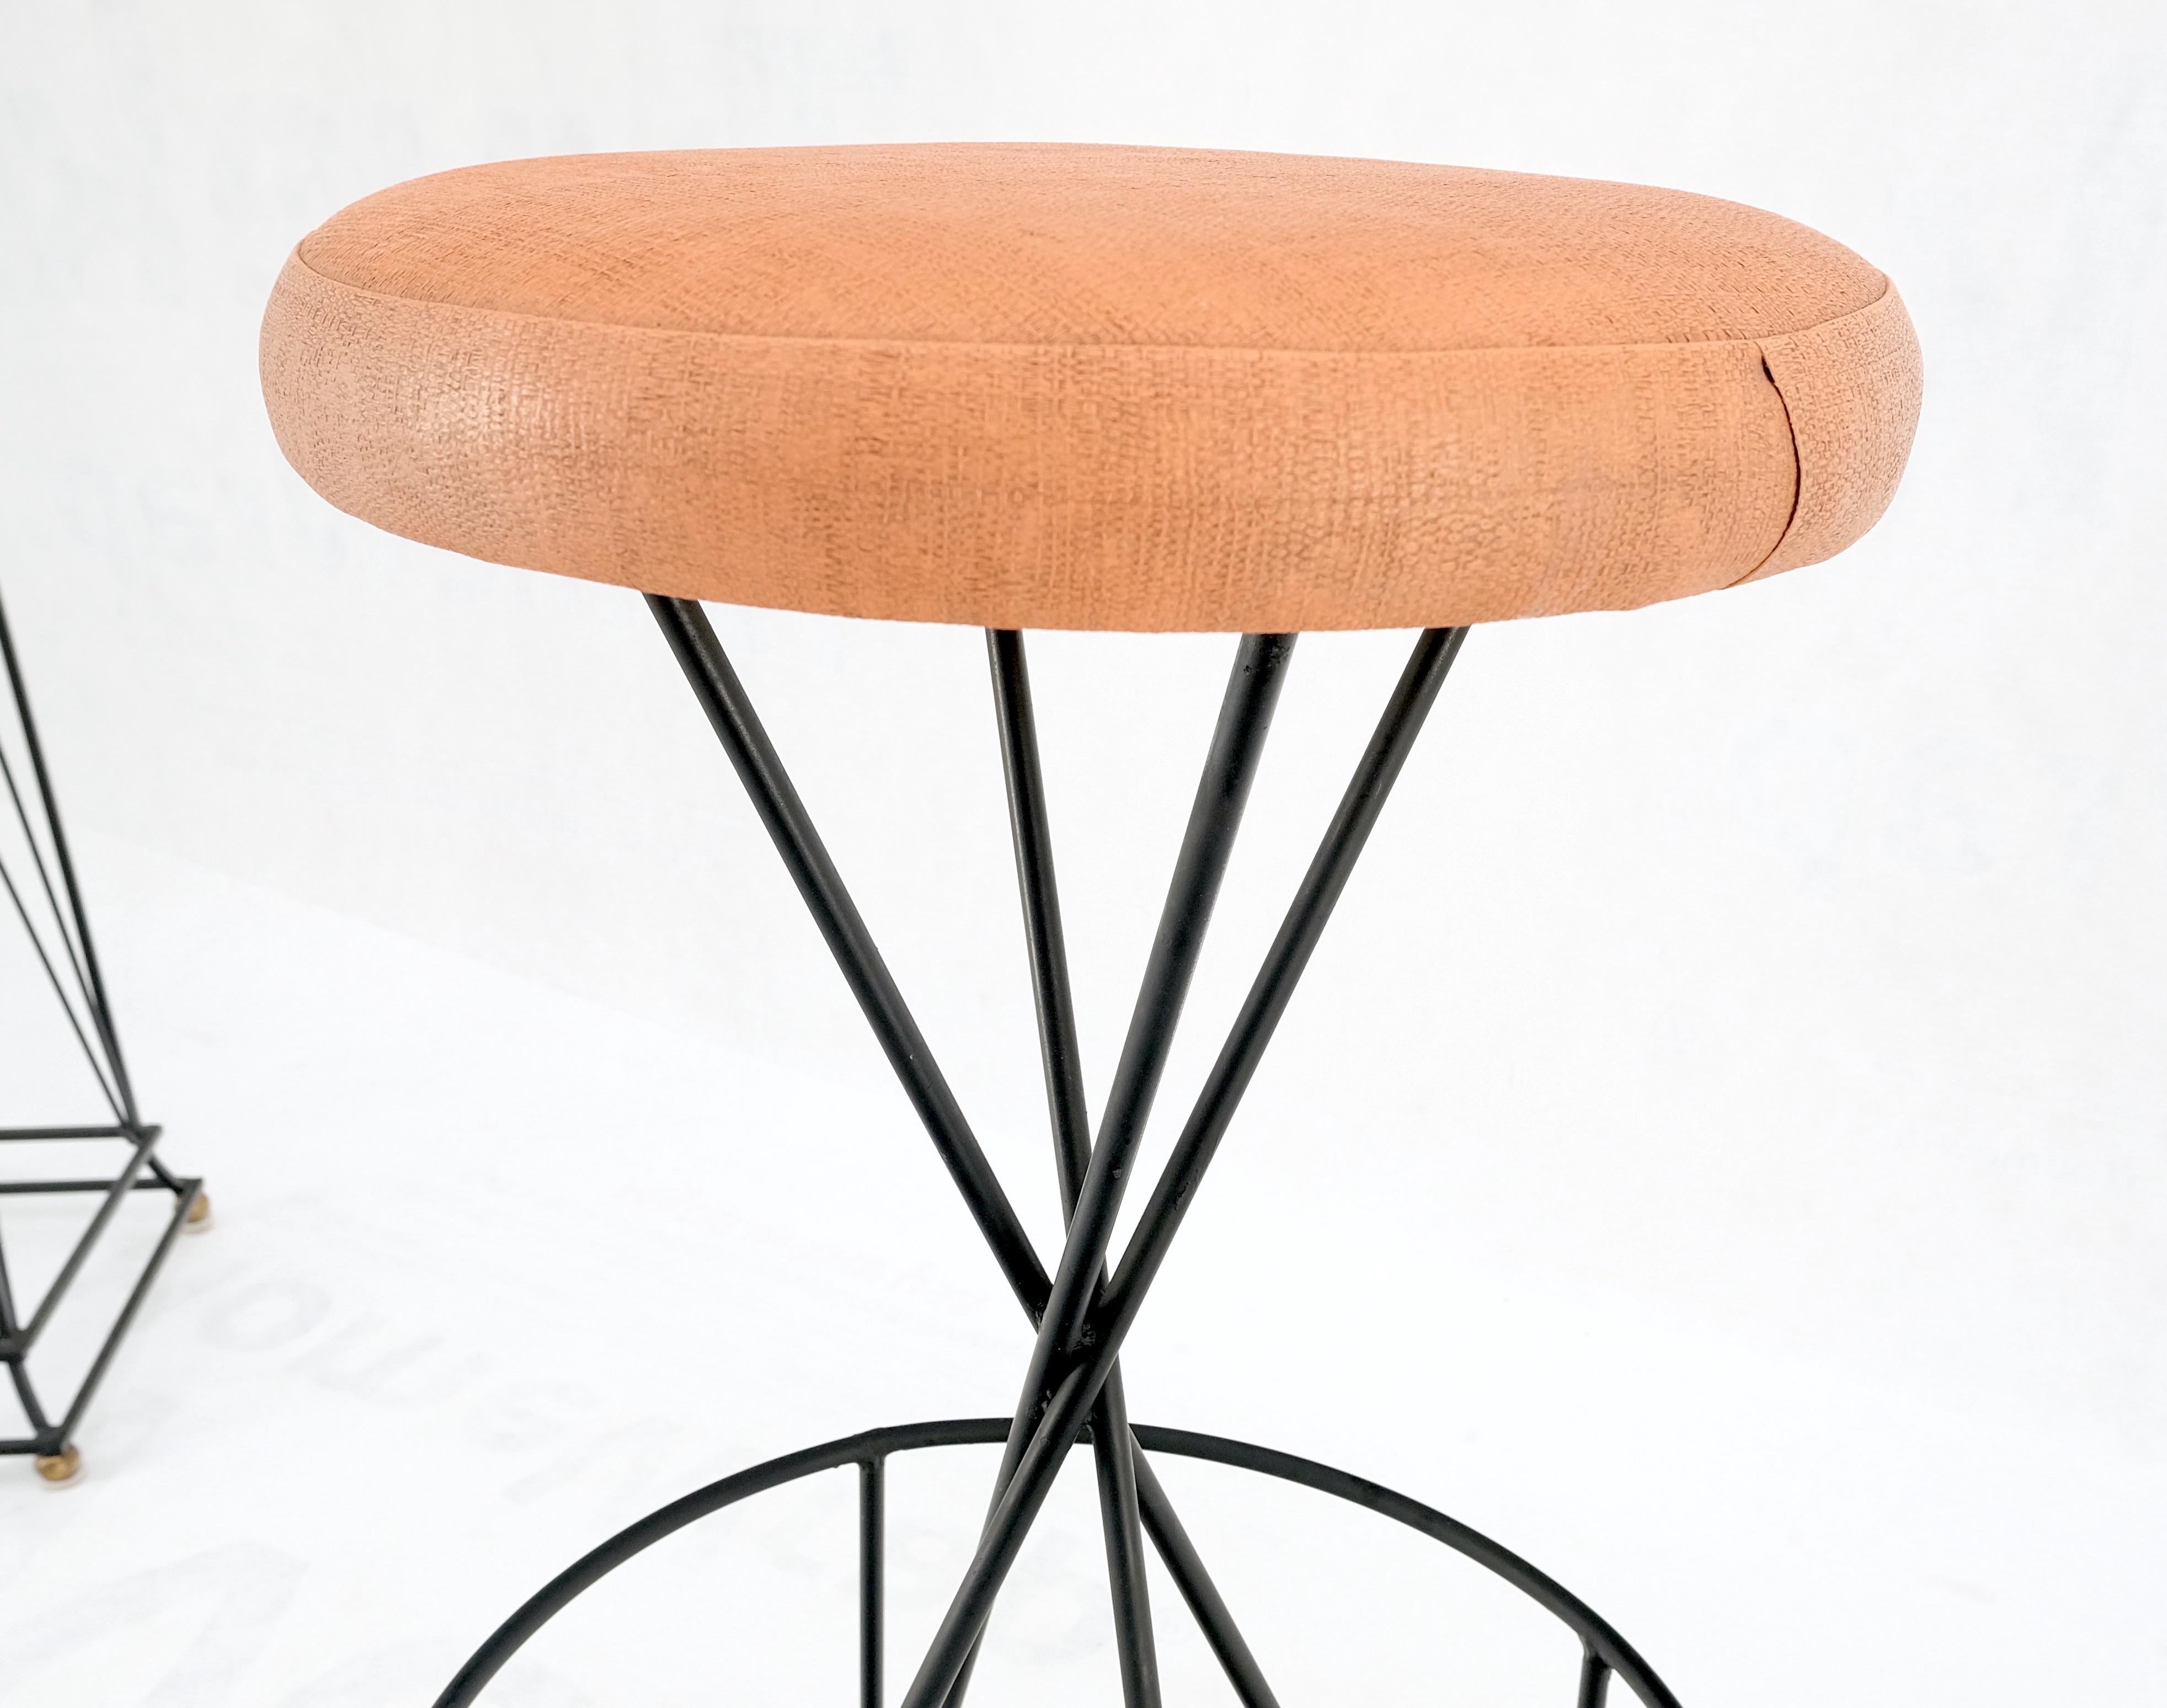 Frederick Weiberg Mid-Century Modern Wire Base Round Seat Bar Stool, circa 1970s In Good Condition For Sale In Rockaway, NJ